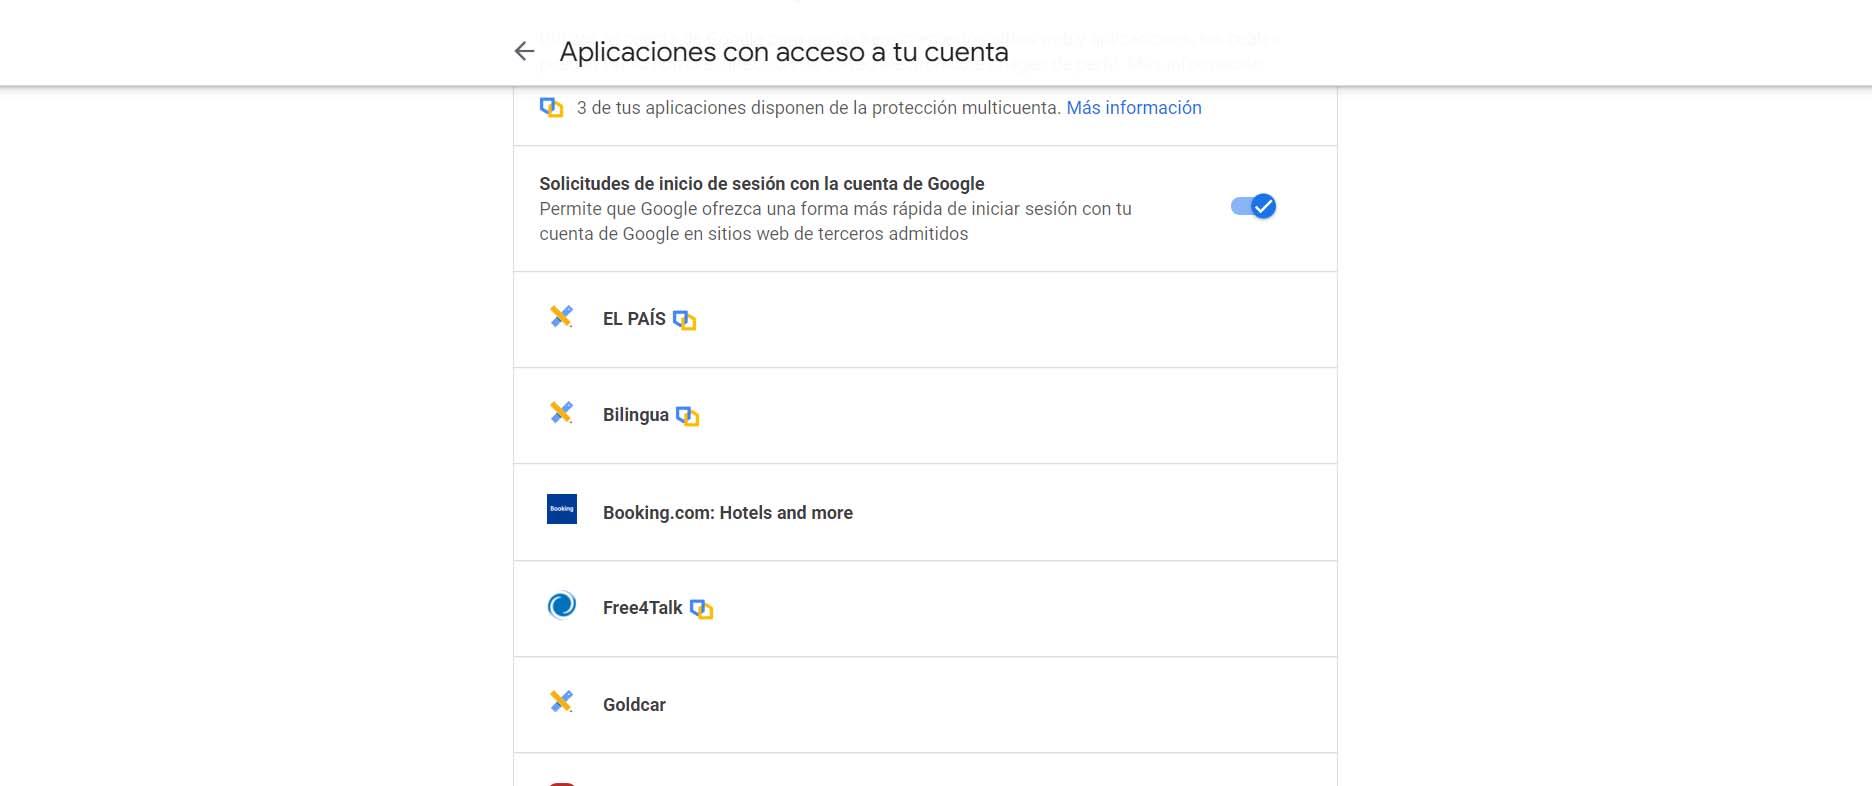 Applications with access to the Google account